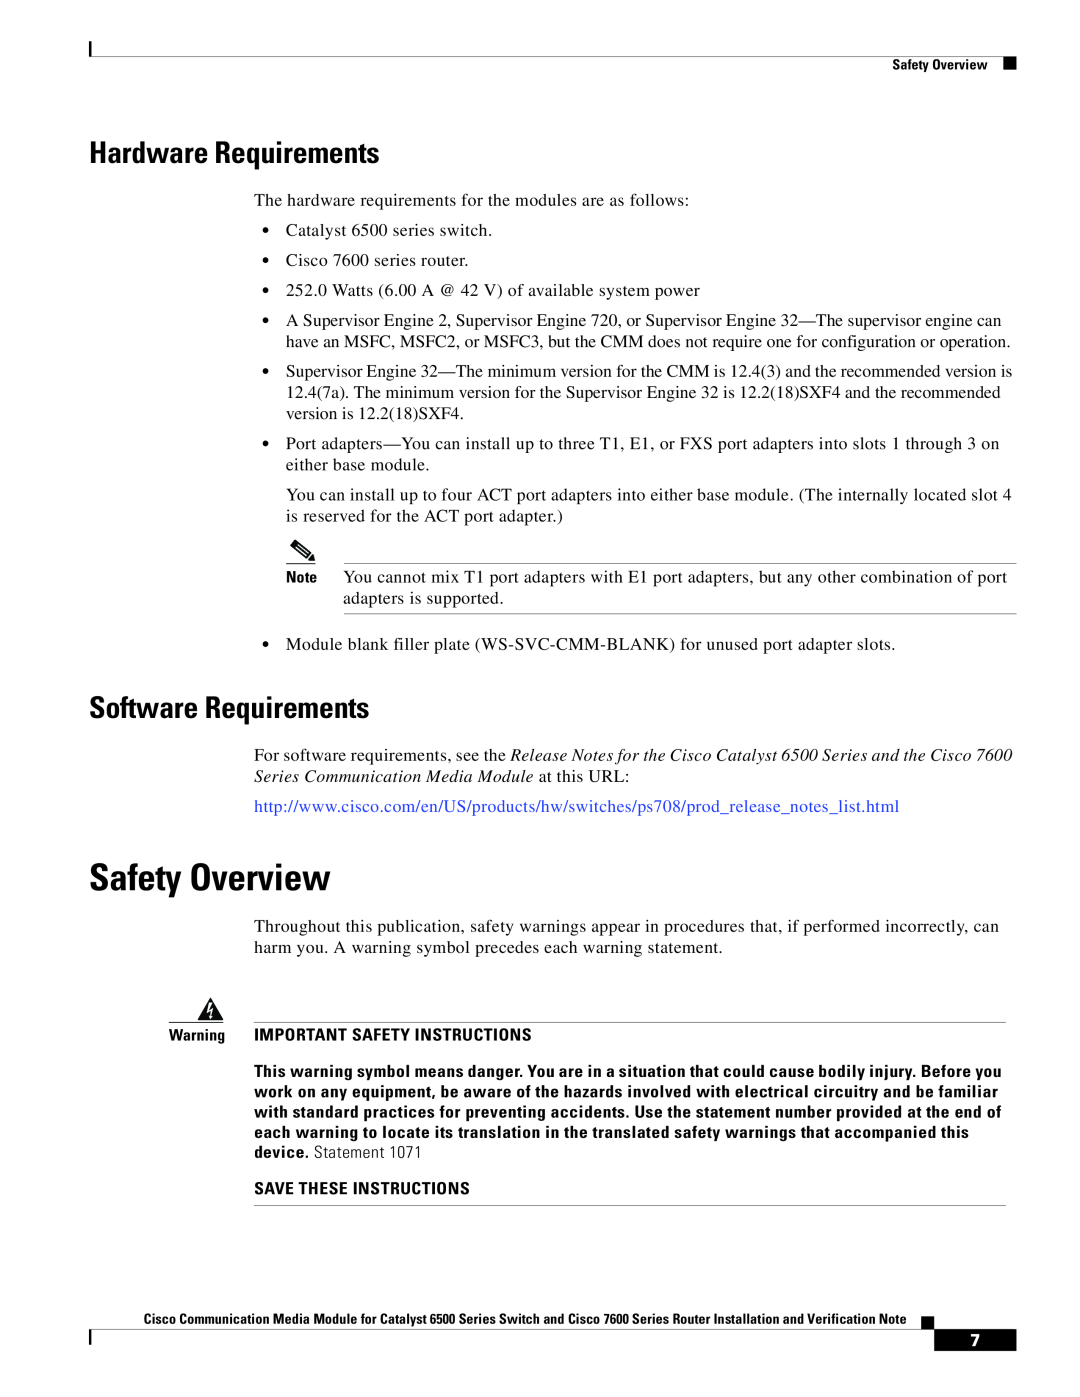 Cisco Systems 6500-E Safety Overview, Hardware Requirements, Software Requirements, Warning IMPORTANT SAFETY INSTRUCTIONS 